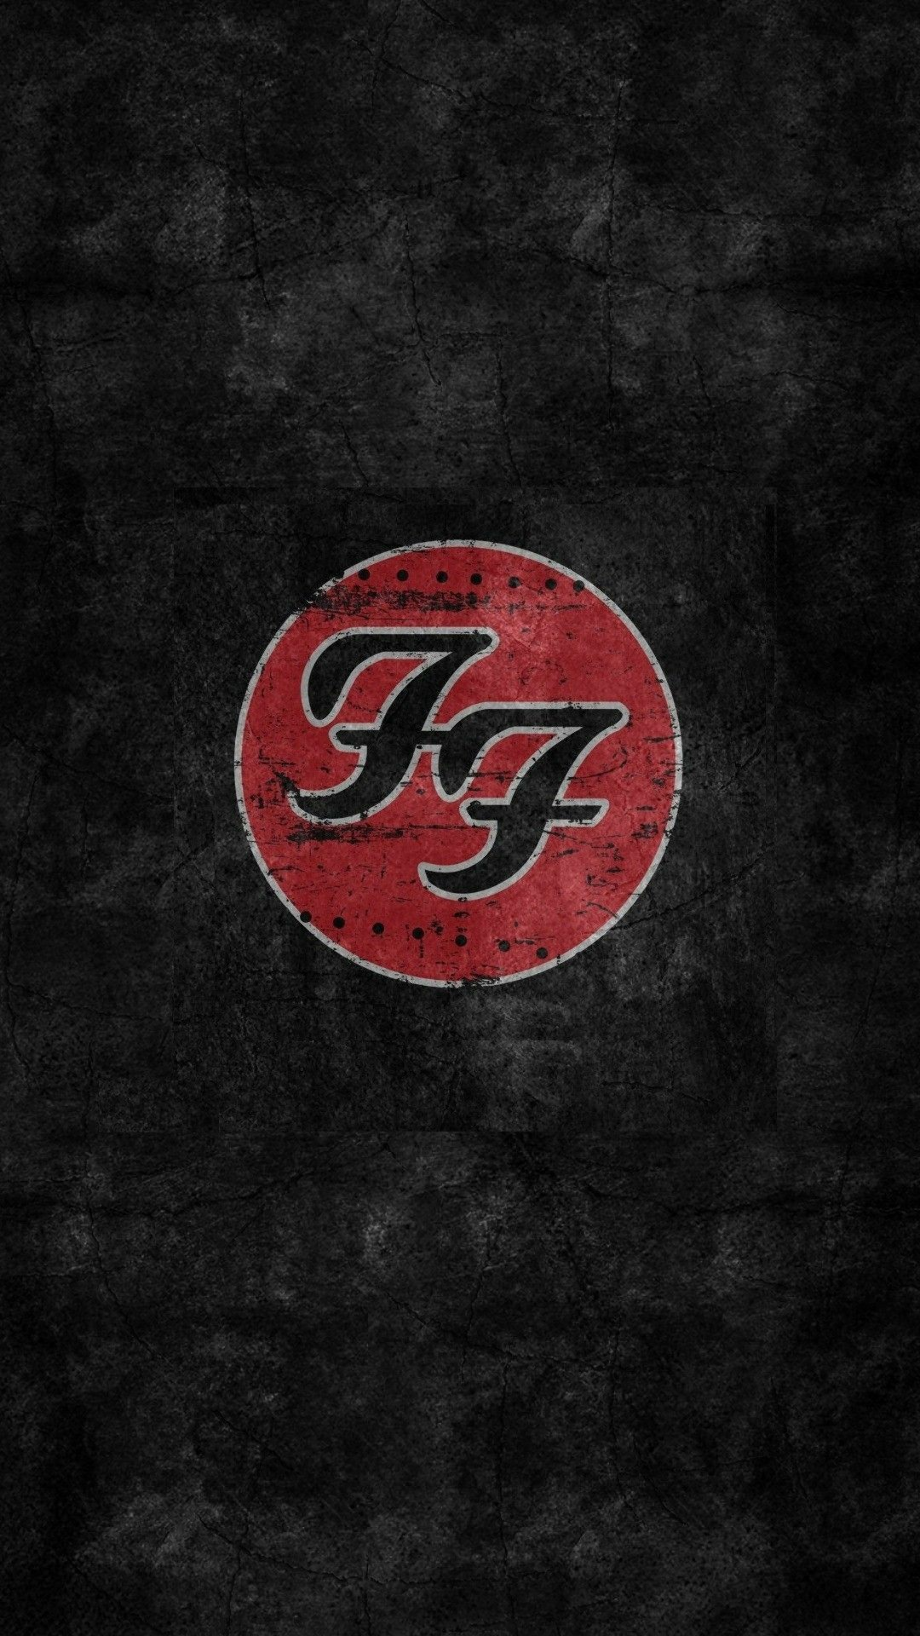 foo fighters logo large